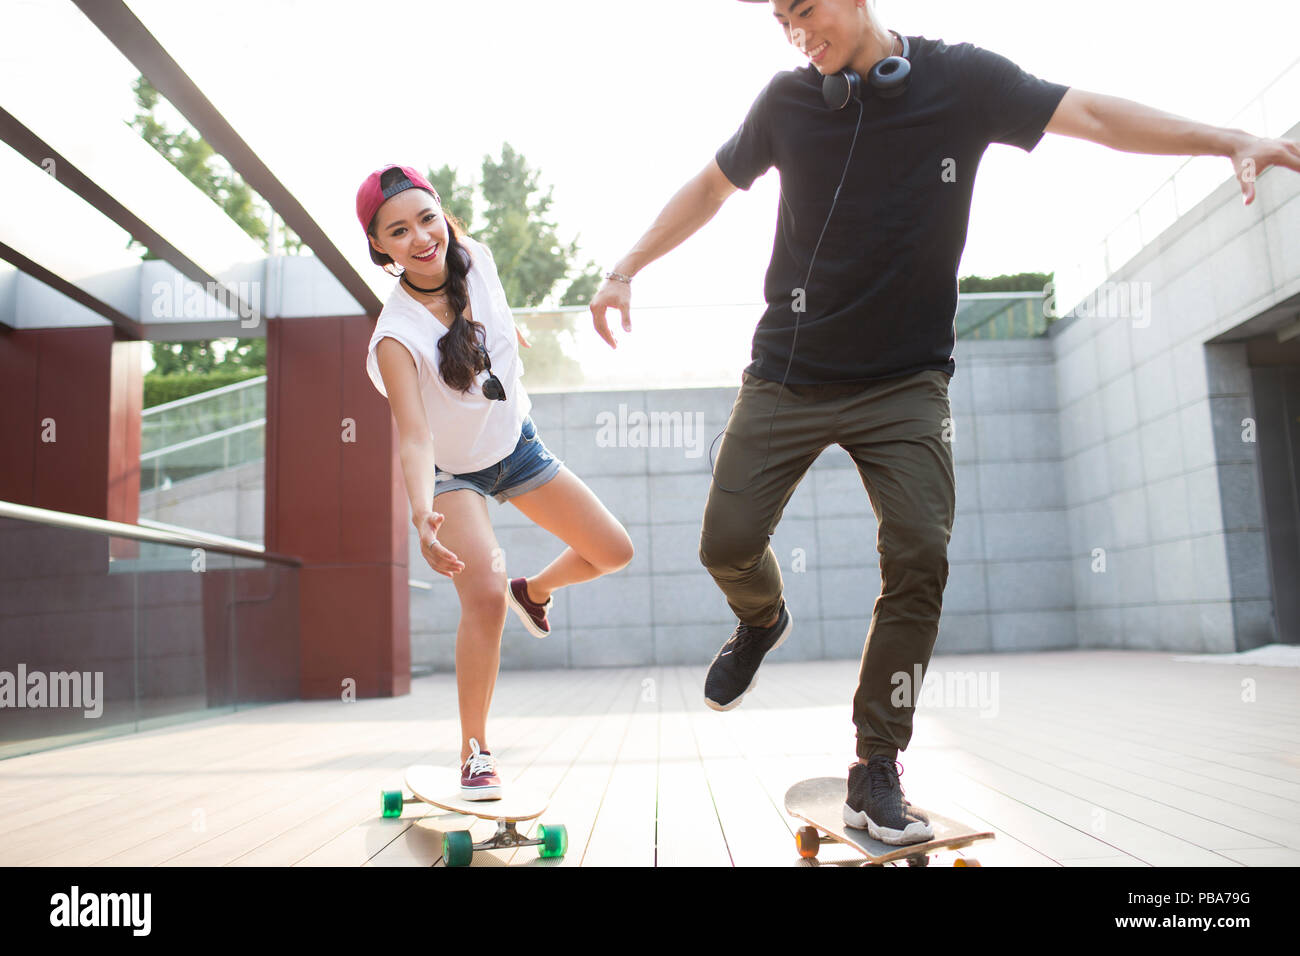 Cheerful young Chinese couple skateboarding Stock Photo